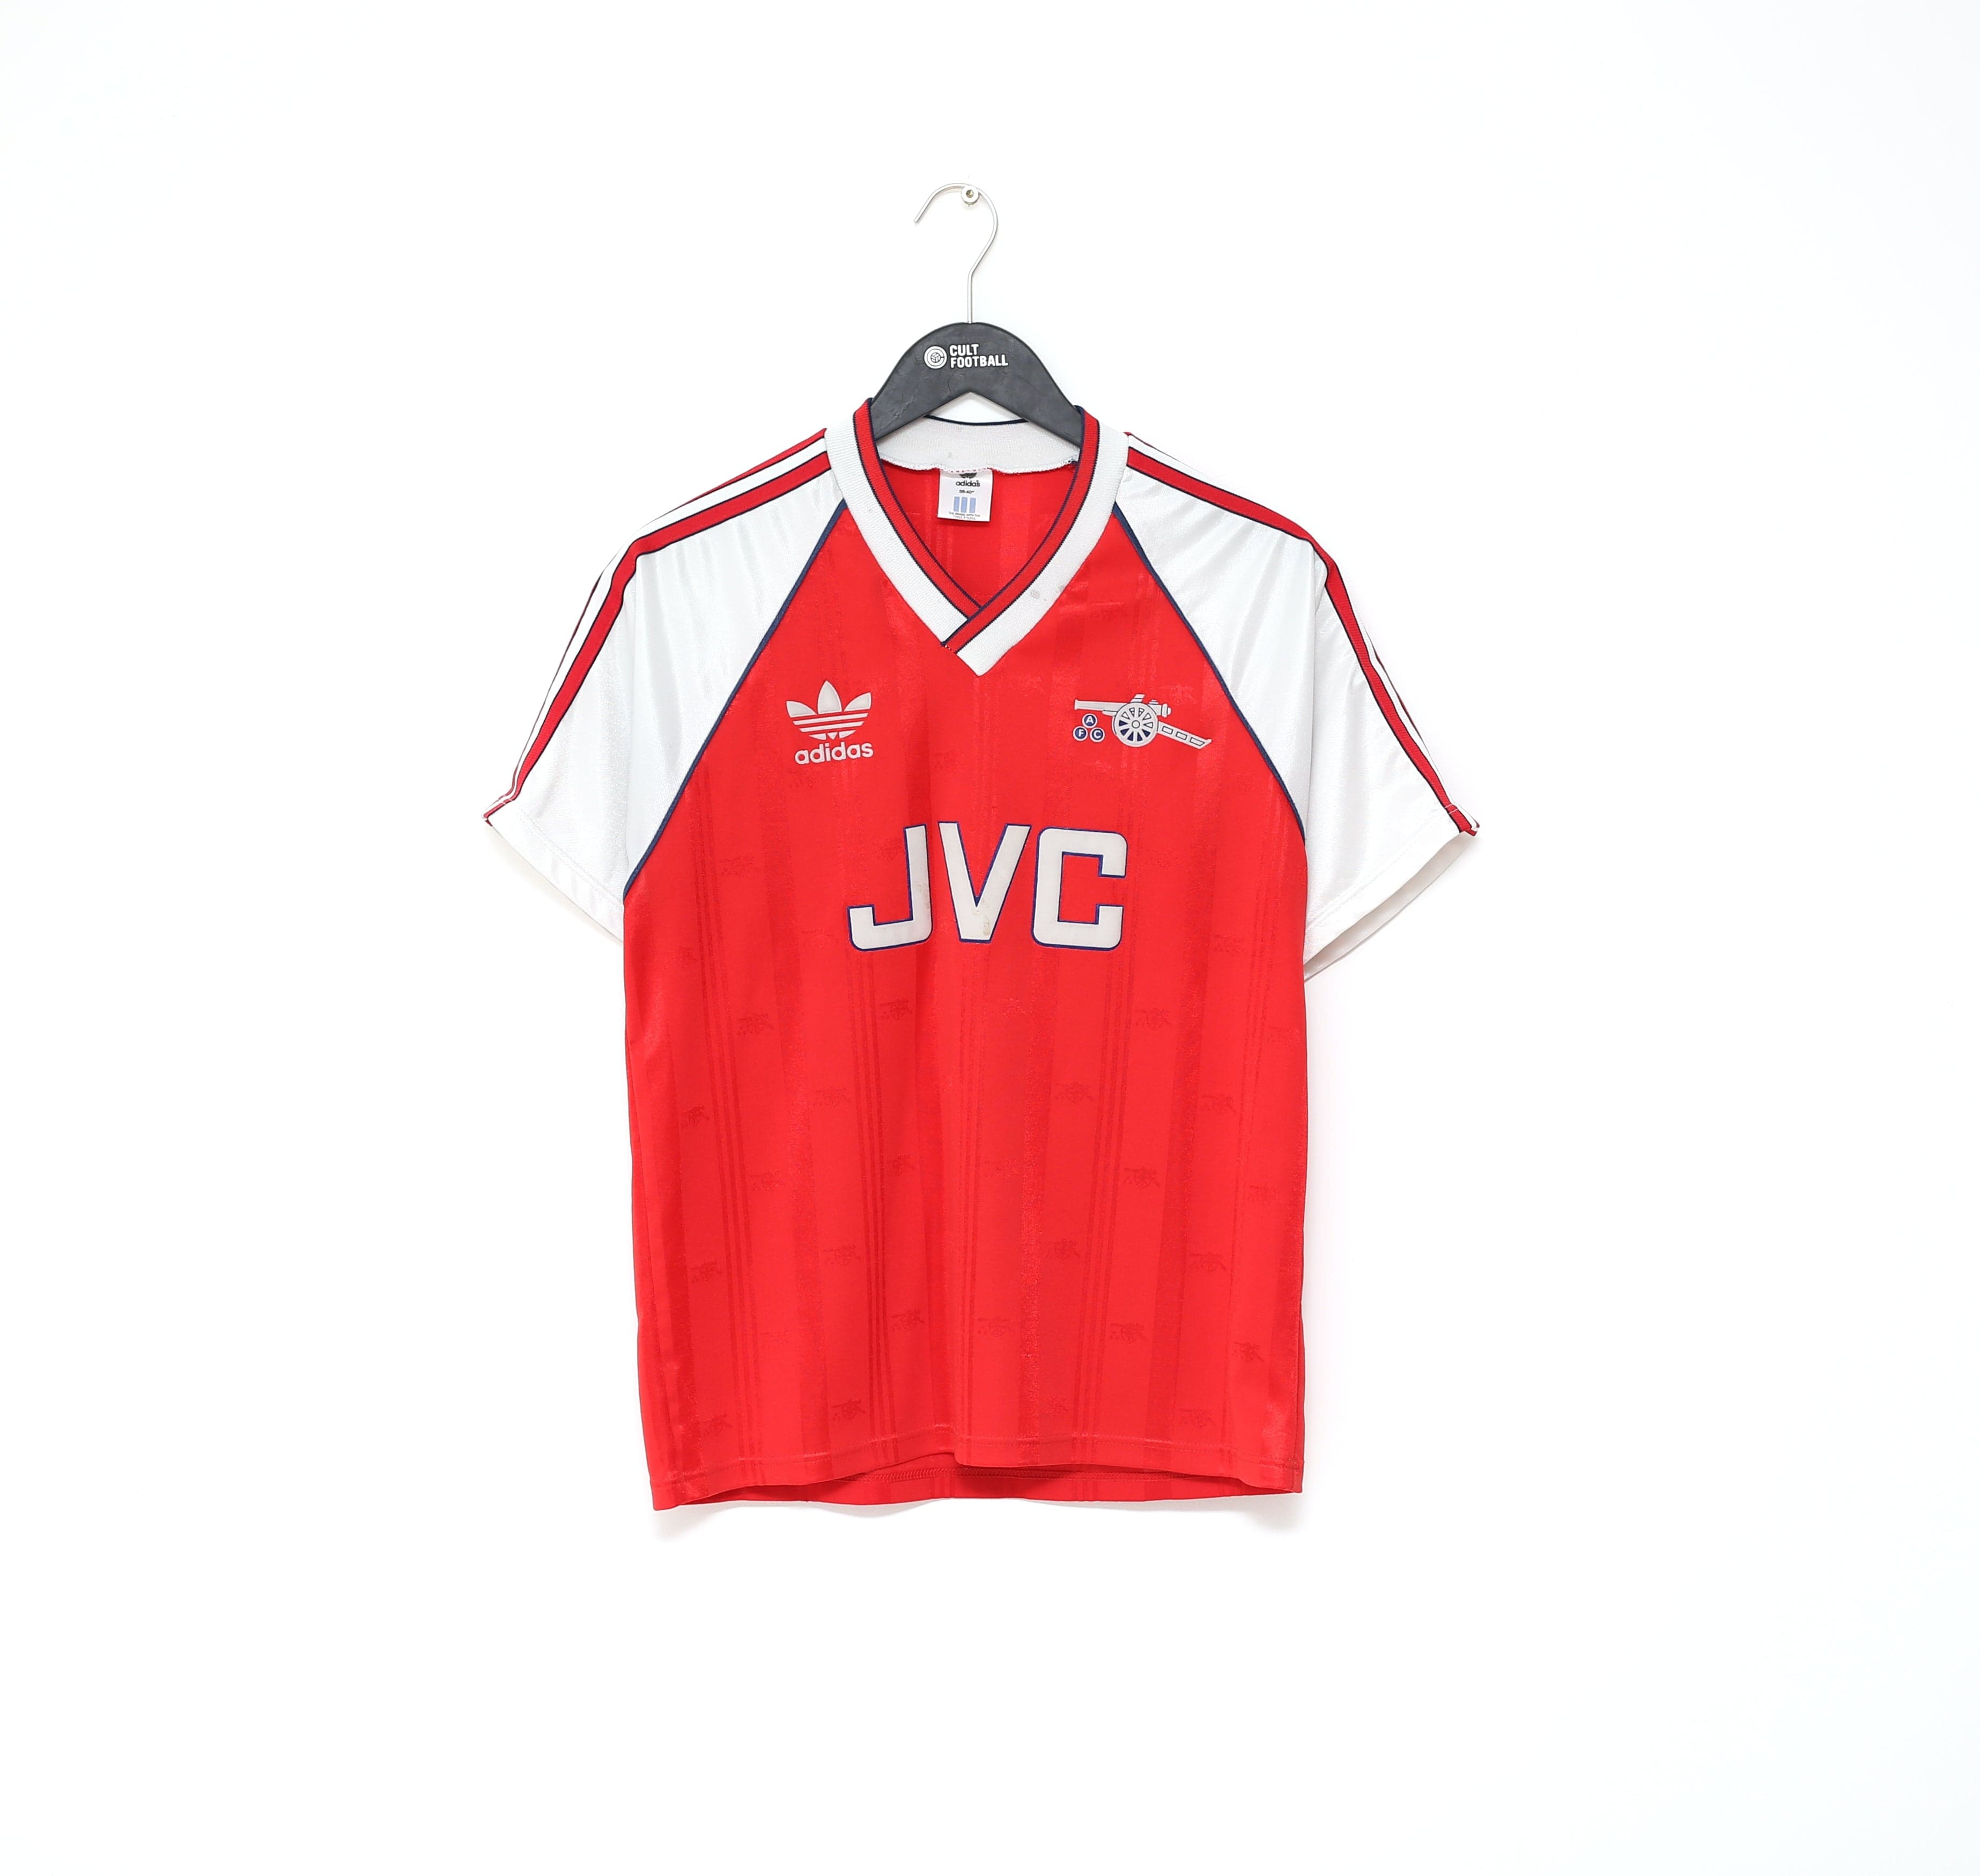 arsenal old jersey